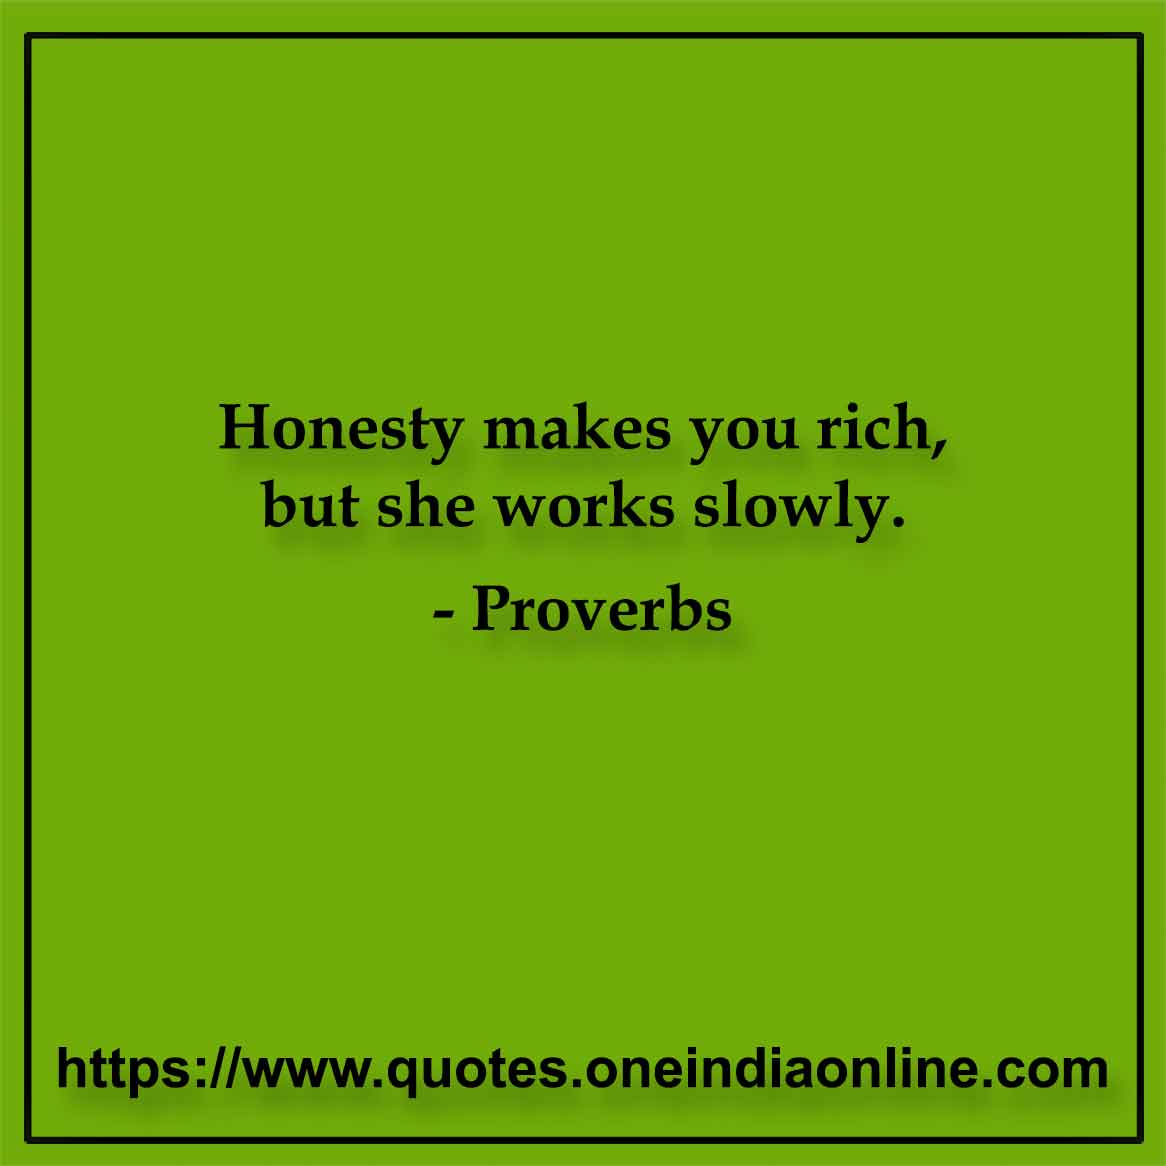 Honesty makes you rich, but she works slowly.